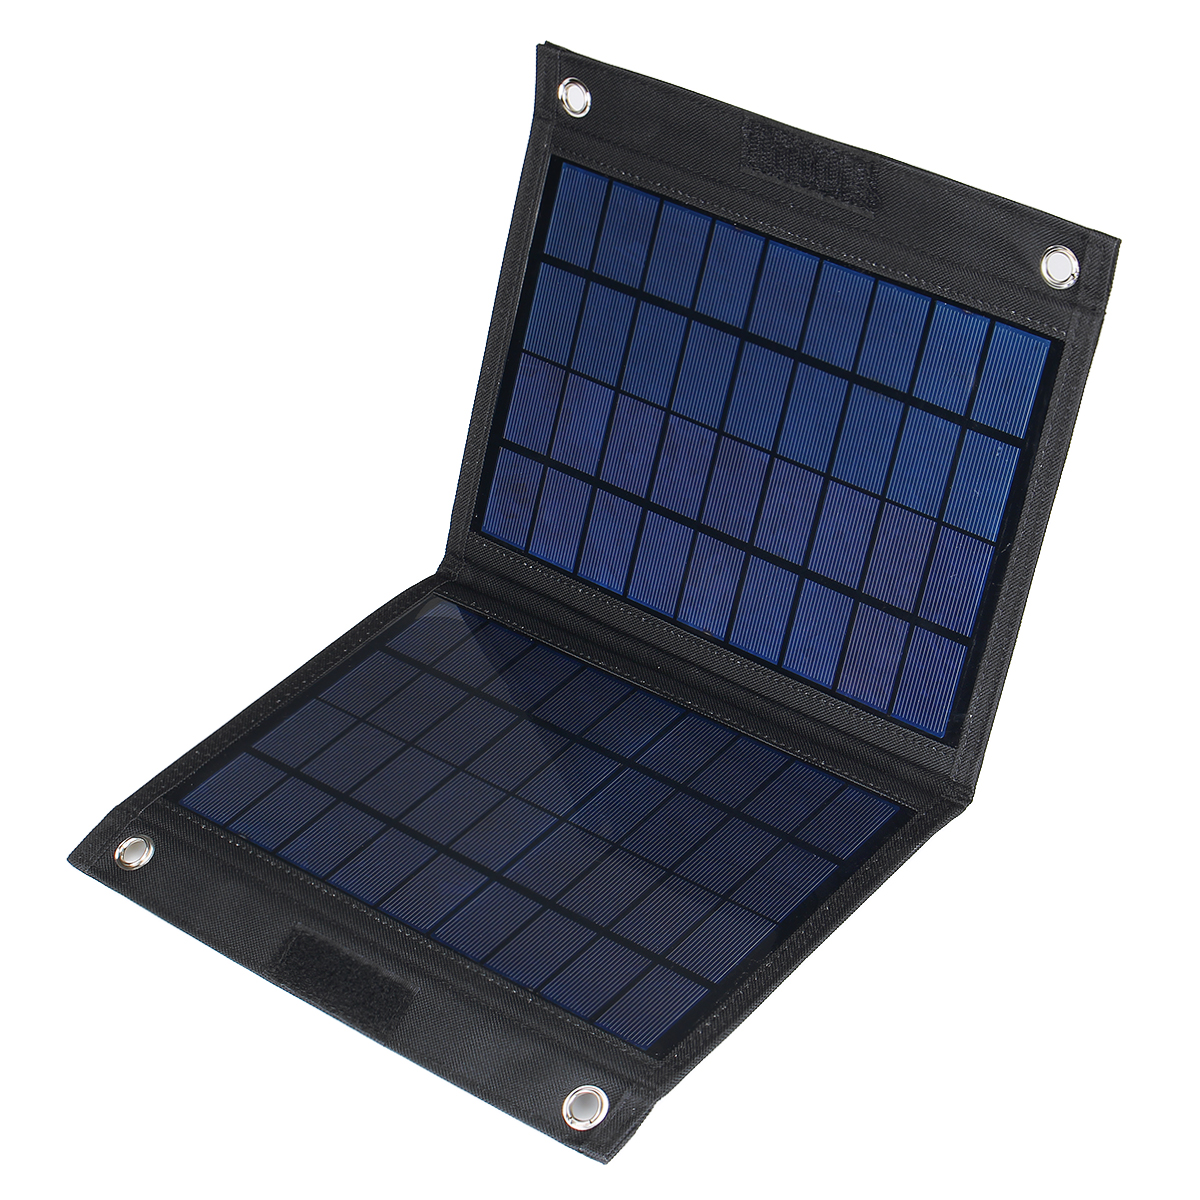 Sunpower-50W-18V-Foldable-Solar-Panel-Charger-Solar-Power-Bank-for-Camping-Hiking-USB-Backpacking-Po-1627758-8